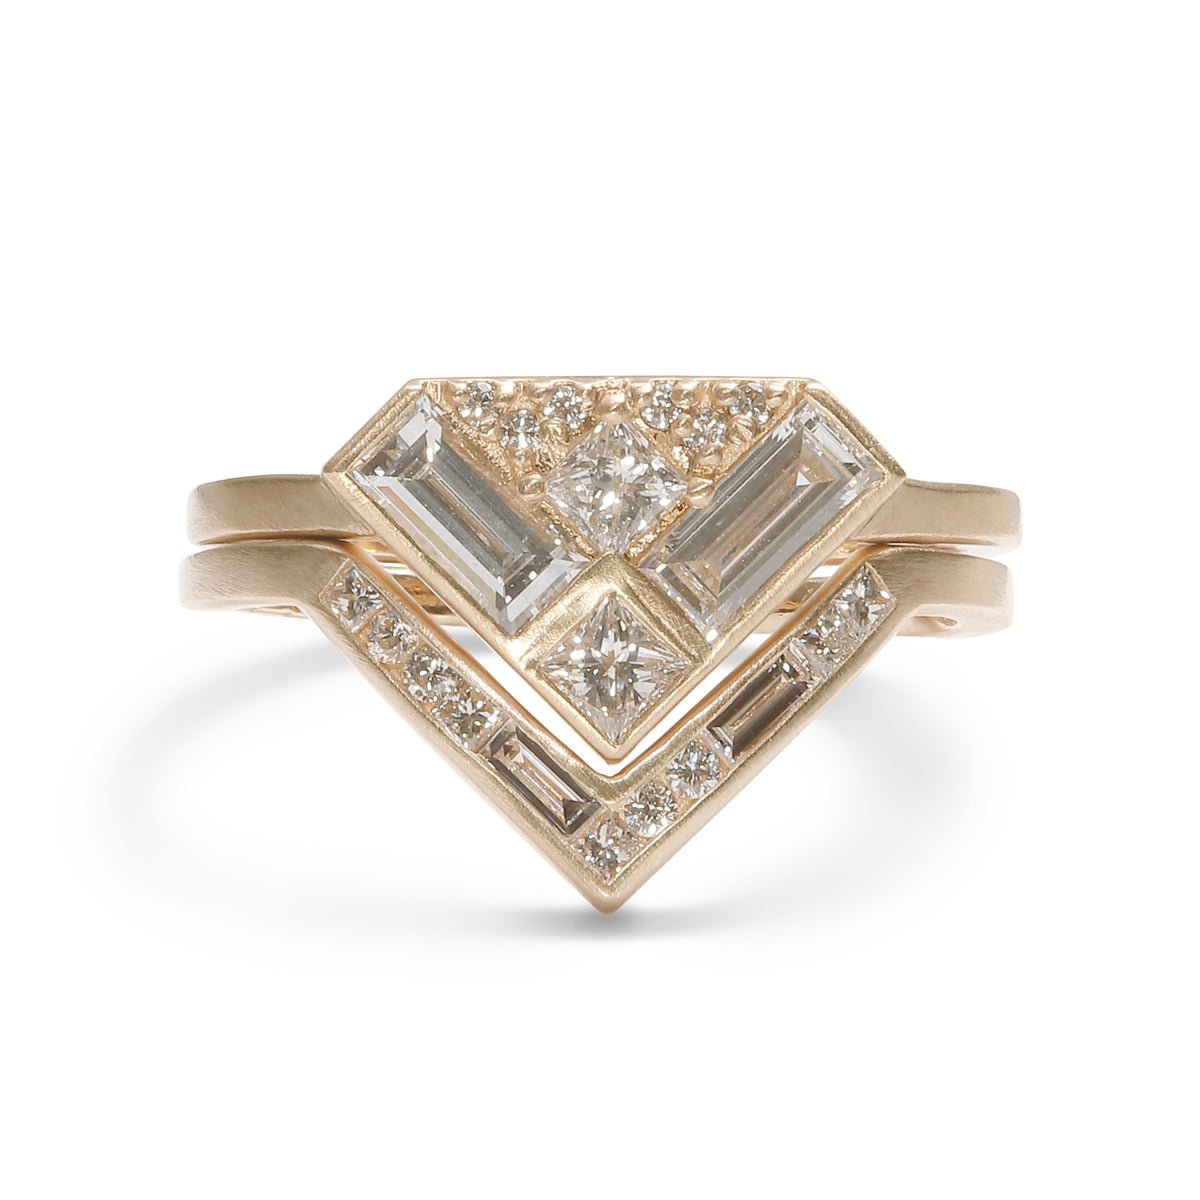 The Aurore ring stacked on top of the Altus ring. Both feature lab-grown diamonds and recycled 14K gold.